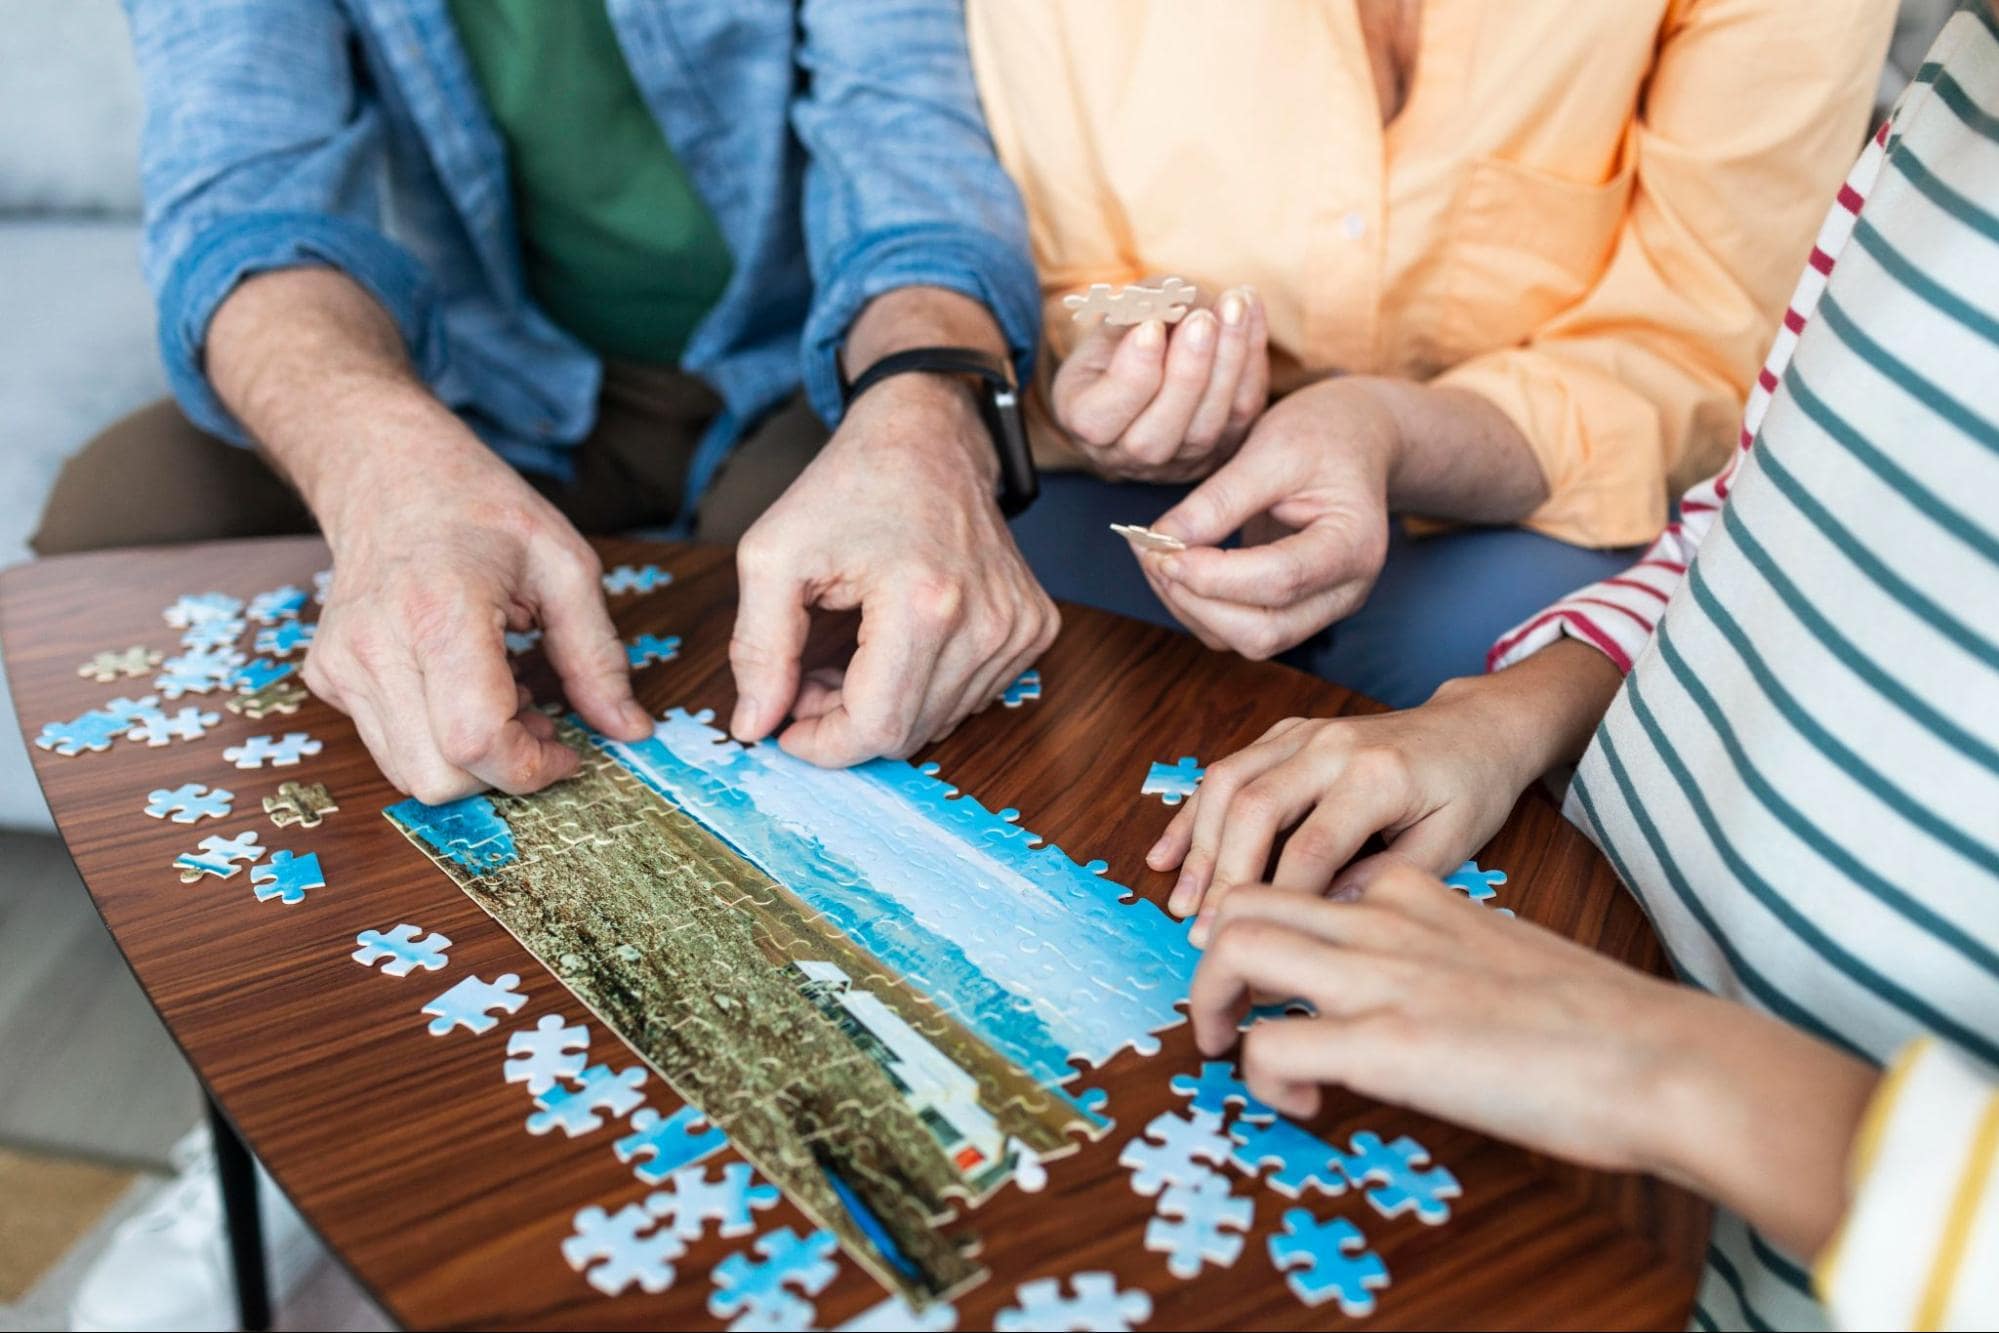 Couples completing puzzle together for a heartfelt birthday gift for girlfriend